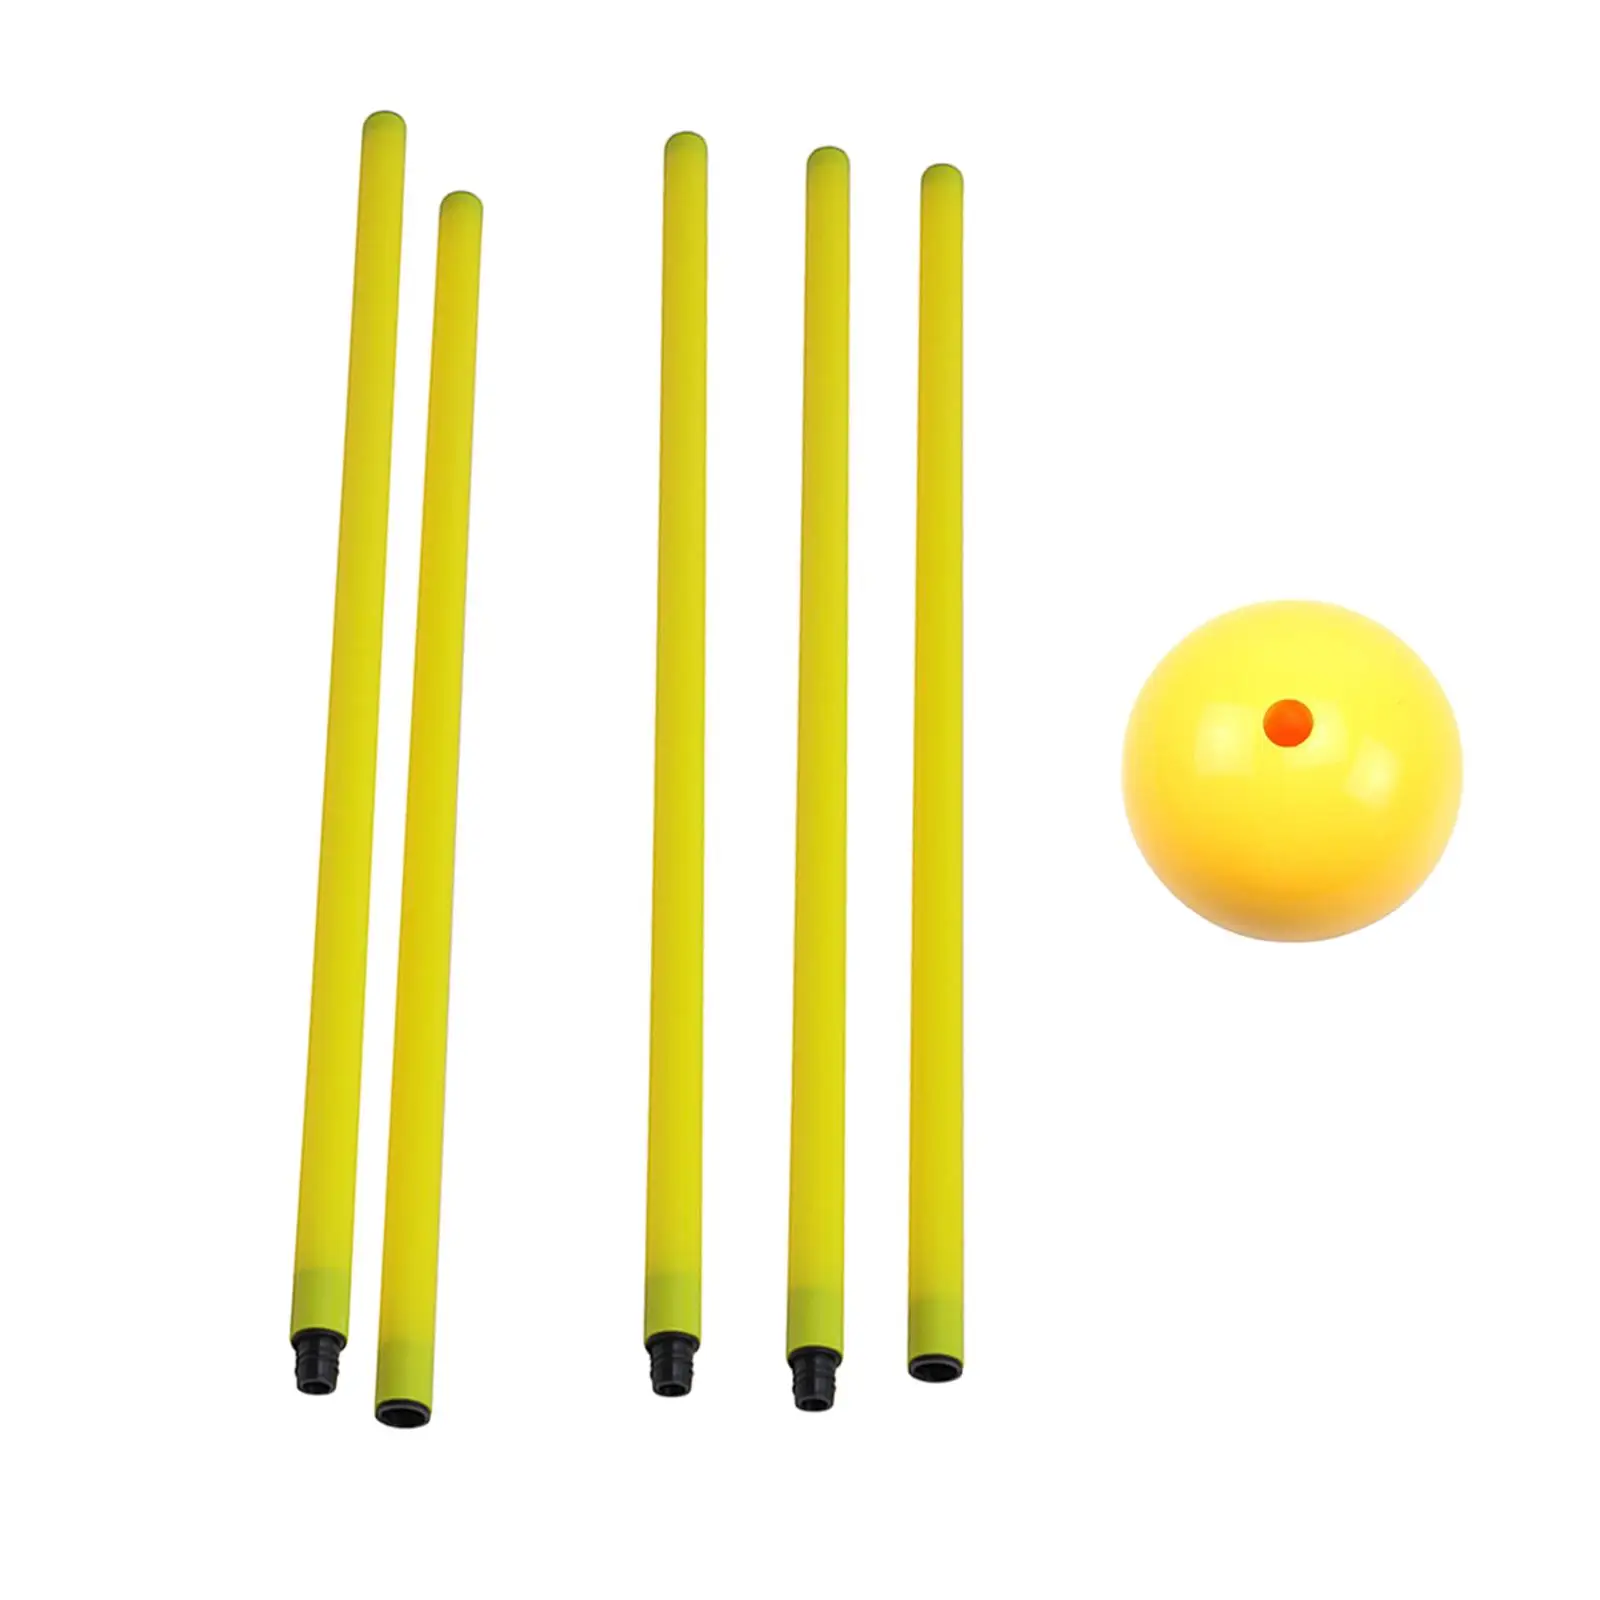 

Training Marker Football Sign Pole Wear Resistant Multipurpose 50cm/Per Football Signs for Outdoor Activity Football Basketball